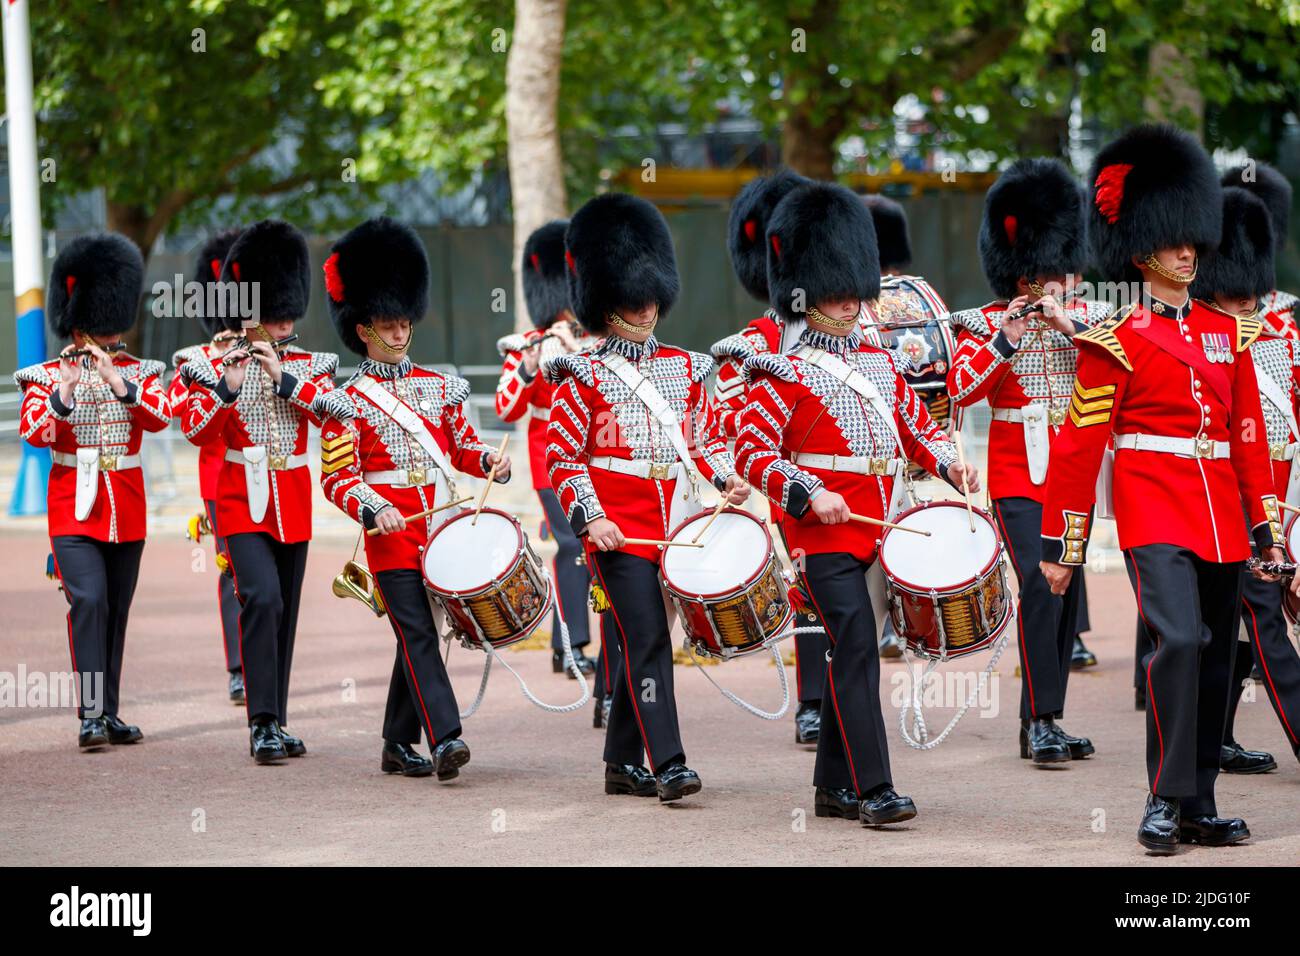 Marching Guards Band, Trooping the Color Probesals, The Mall, London England, Vereinigtes Königreich, Samstag, 21.Mai 2022. Stockfoto